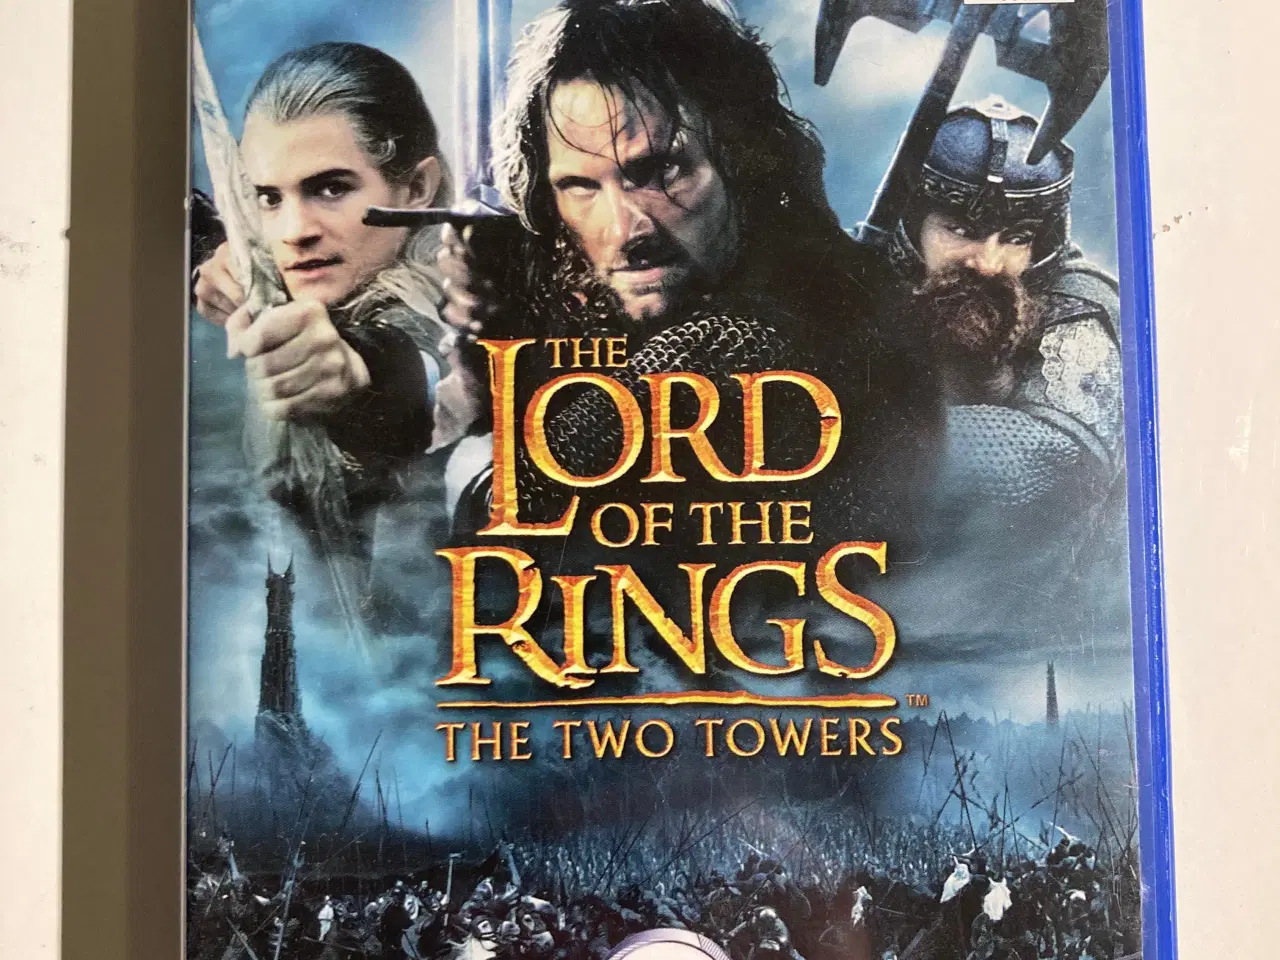 Billede 1 - Lord of the Rings the Two Towers